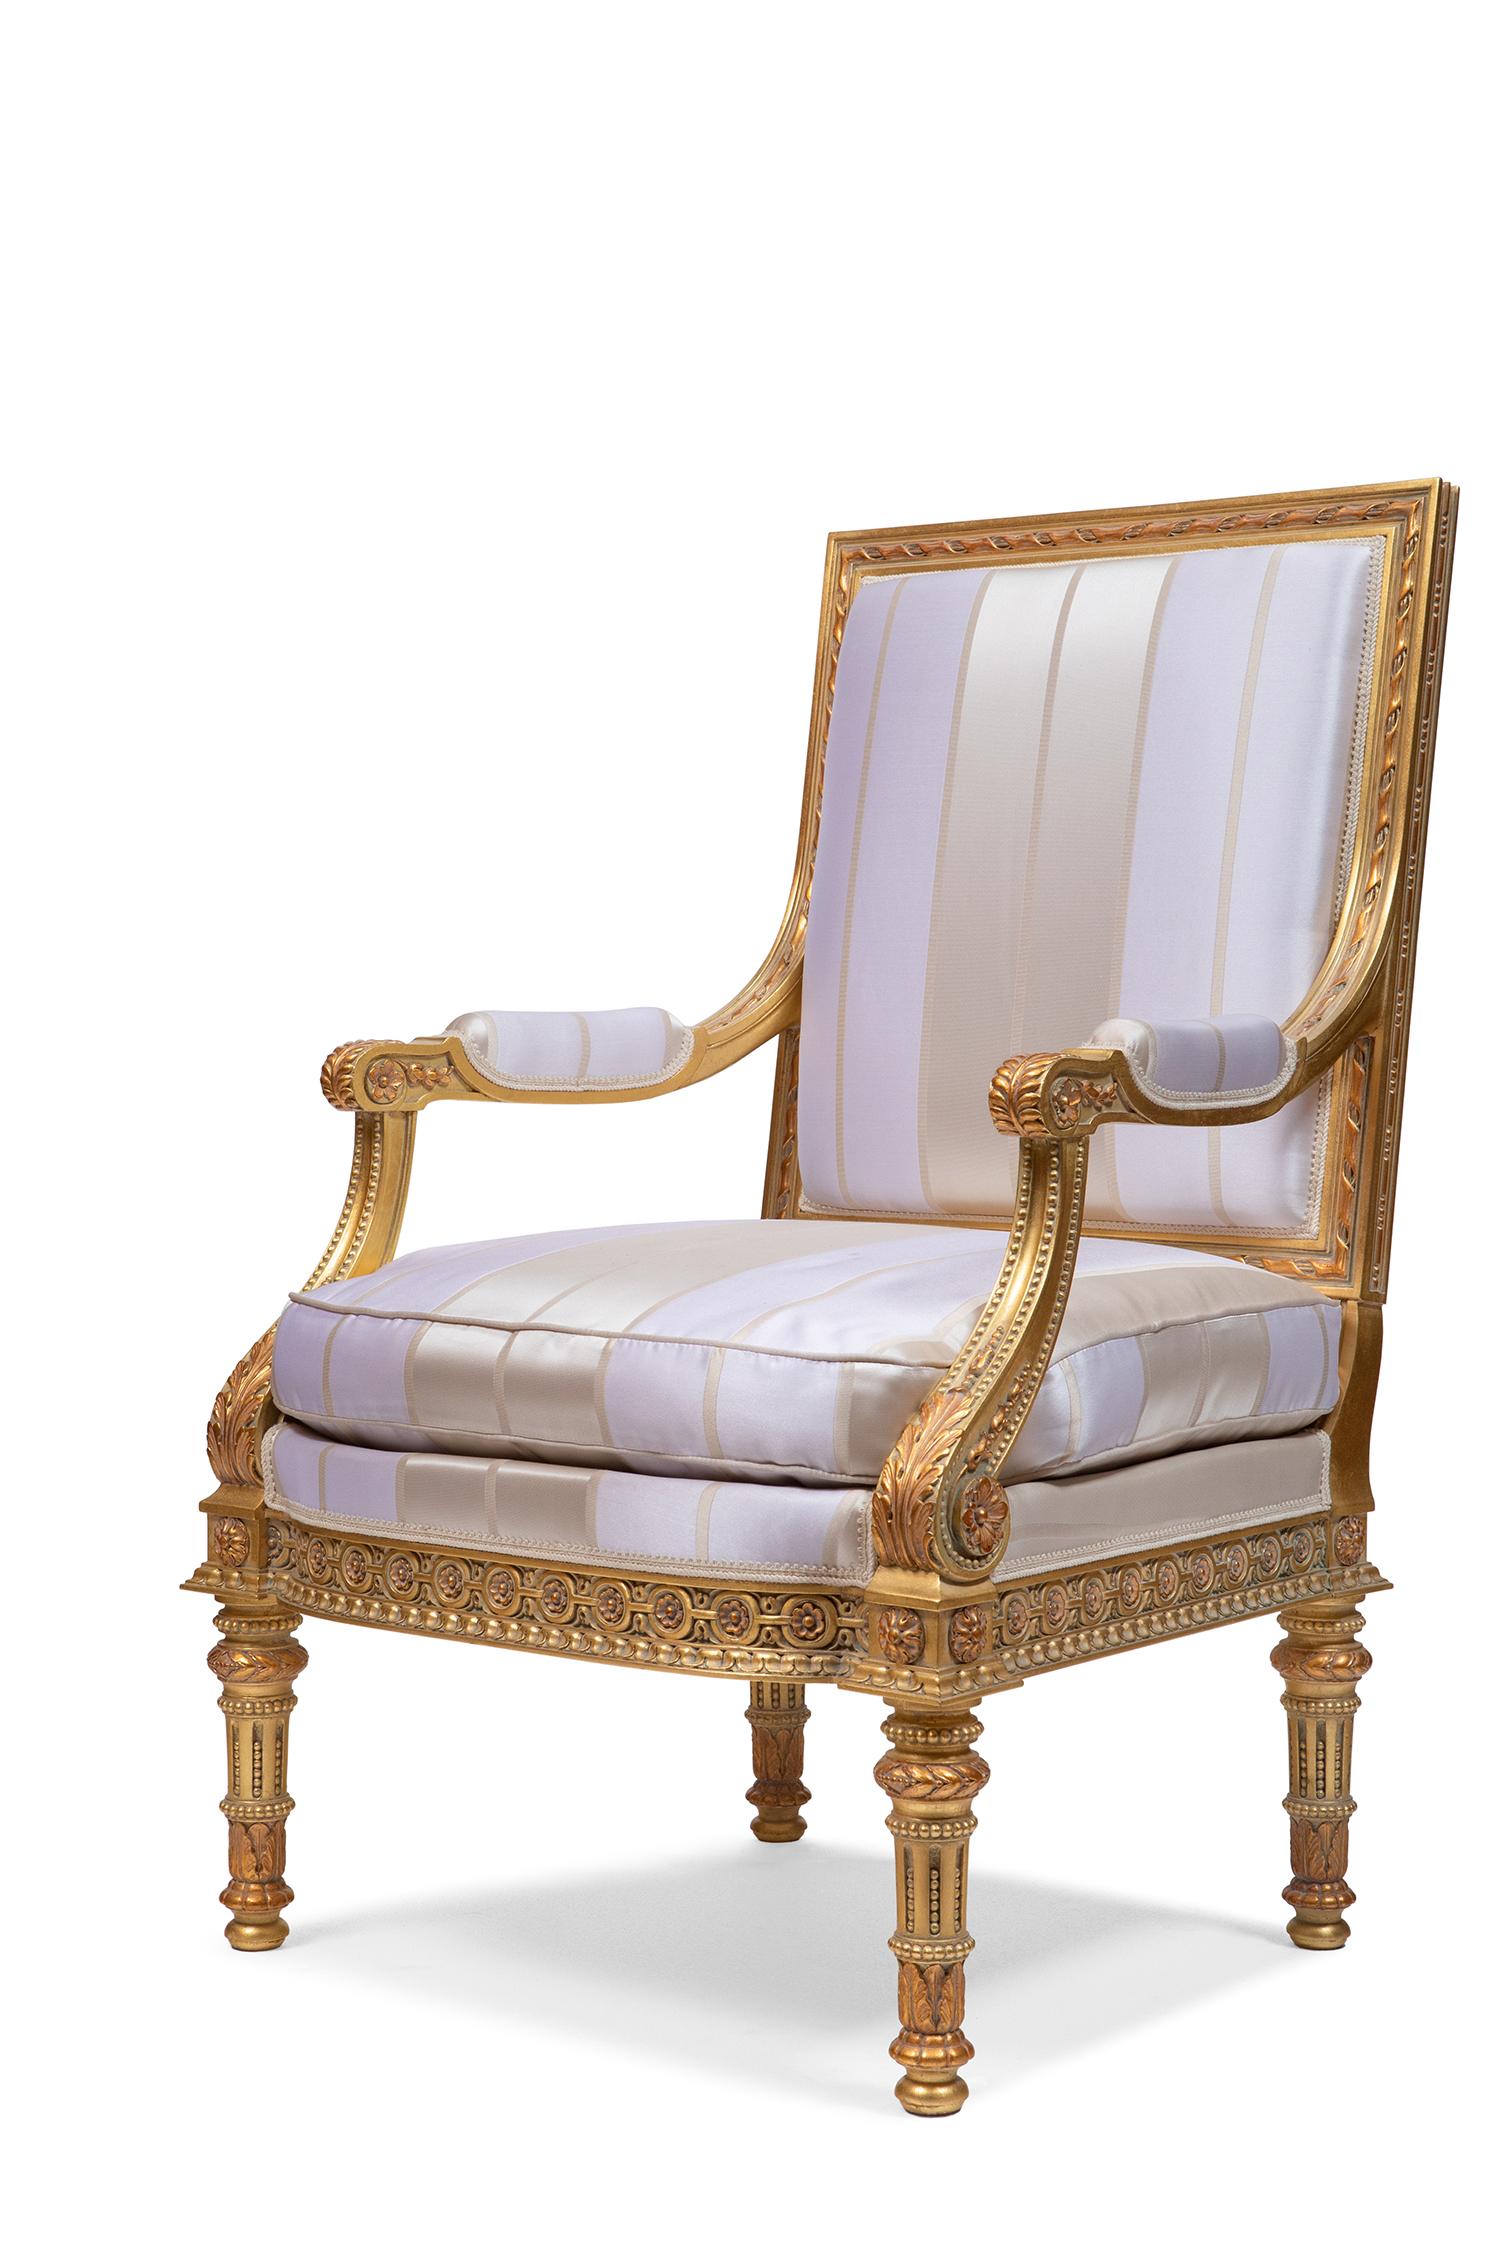 LSXVI style inspired armchair. The first one was designed and made probably at the end of 1800, but it is still in current classical Belloni production.
Wood frame finely hand carved in Italy. Proposed in gold leaf finishing, but available in other